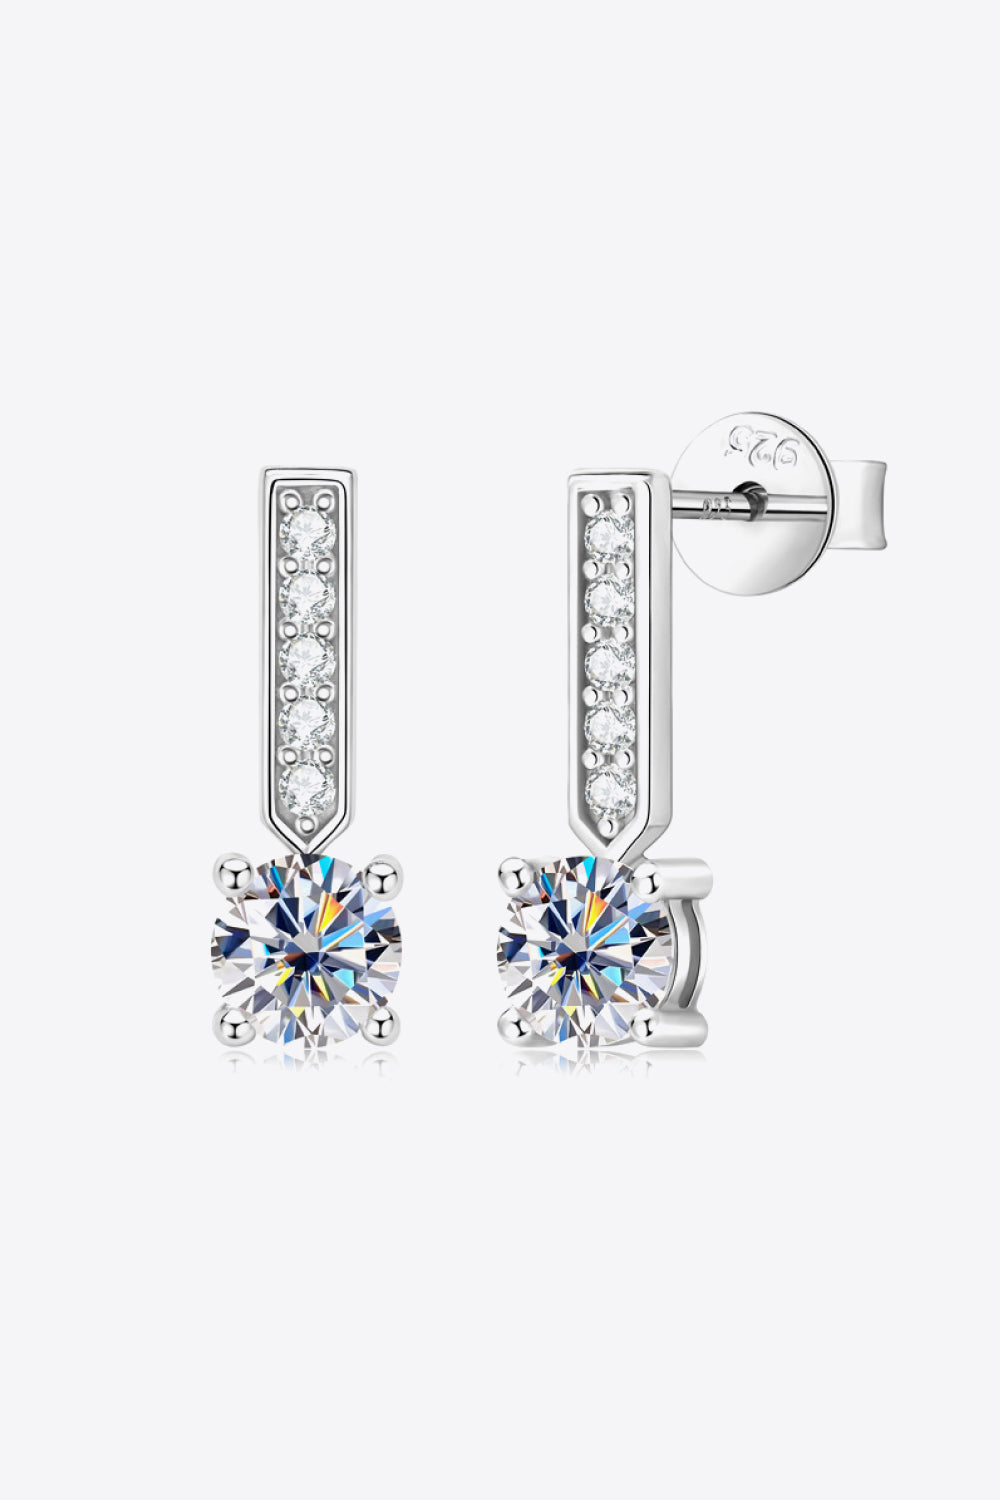 Moissanite and Zircon 925 Sterling Silver Drop Earrings (Platinum-Plated Fine Silver)